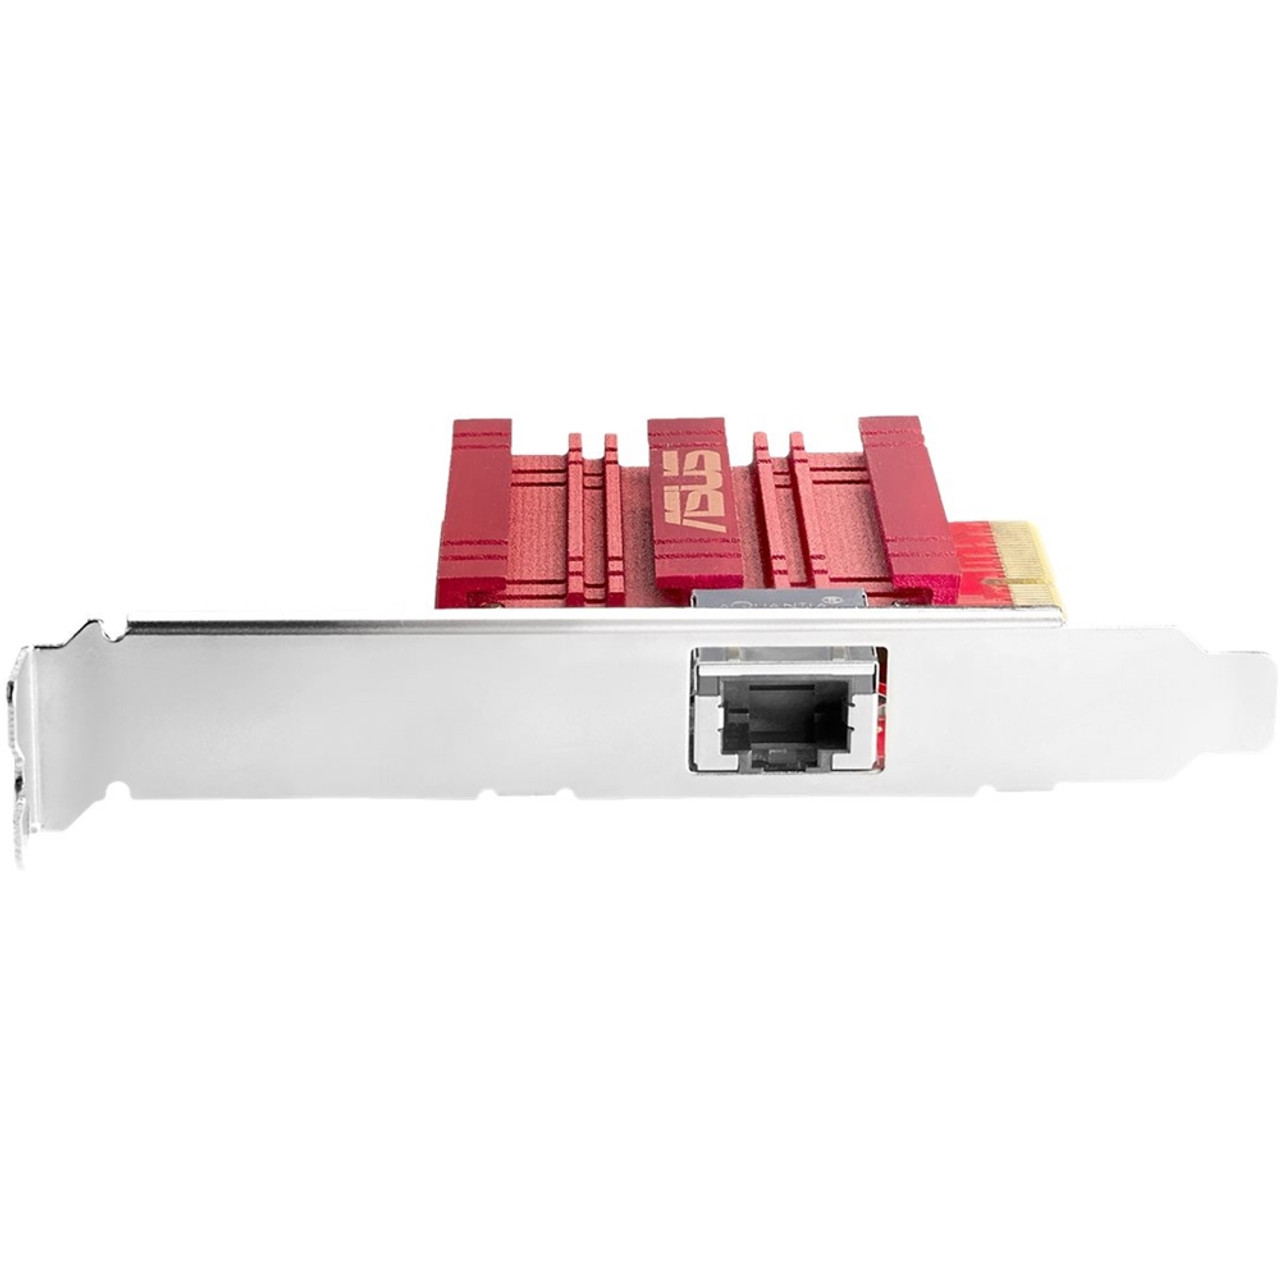 ASUS - PCIe Network Card - Red